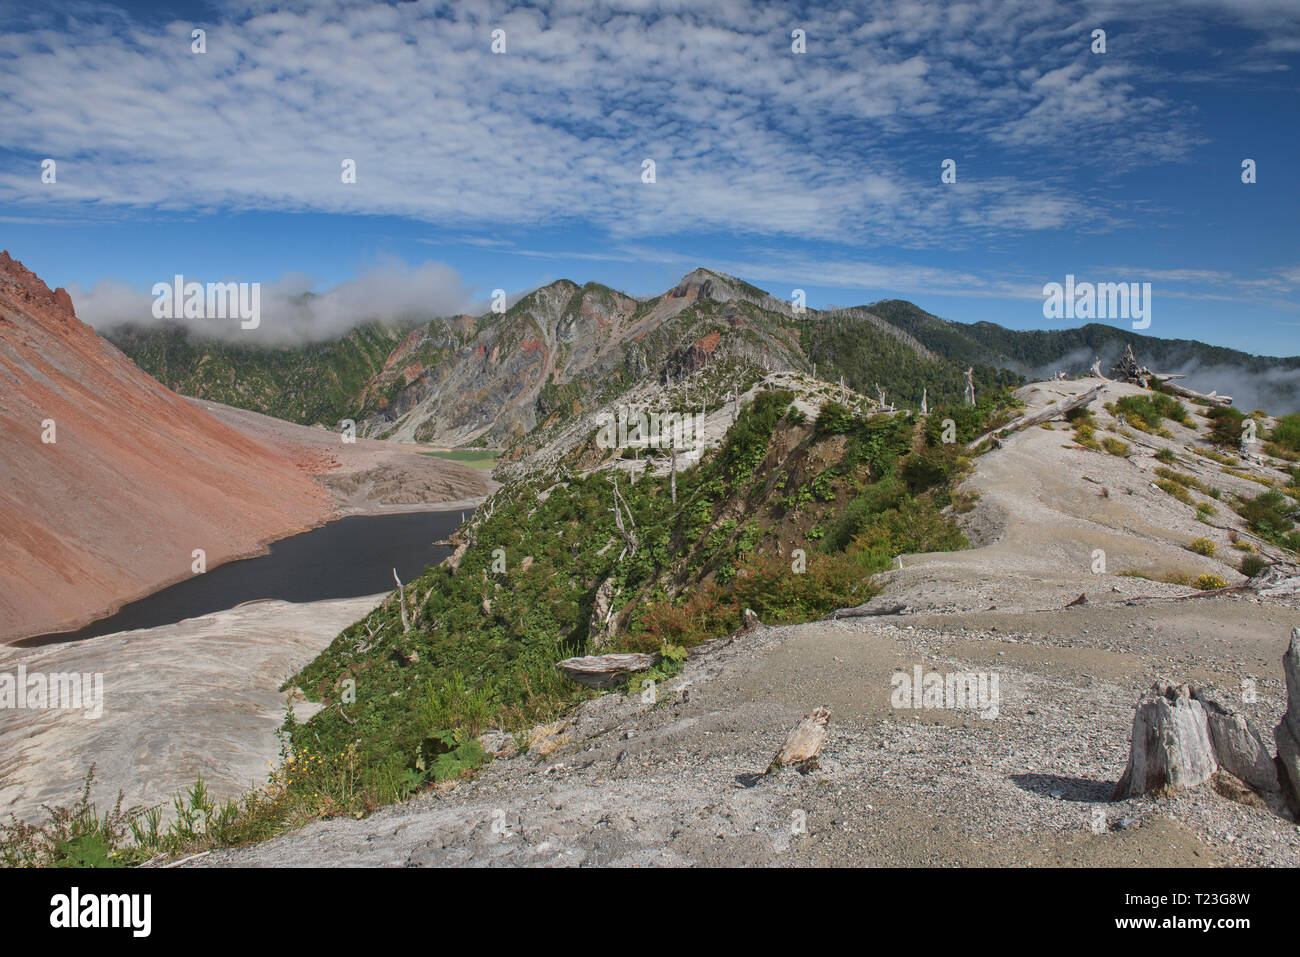 View of the caldera and scenery of Chaitén volcano, Pumalin National Park, Patagonia, Chaitén, Chile Stock Photo